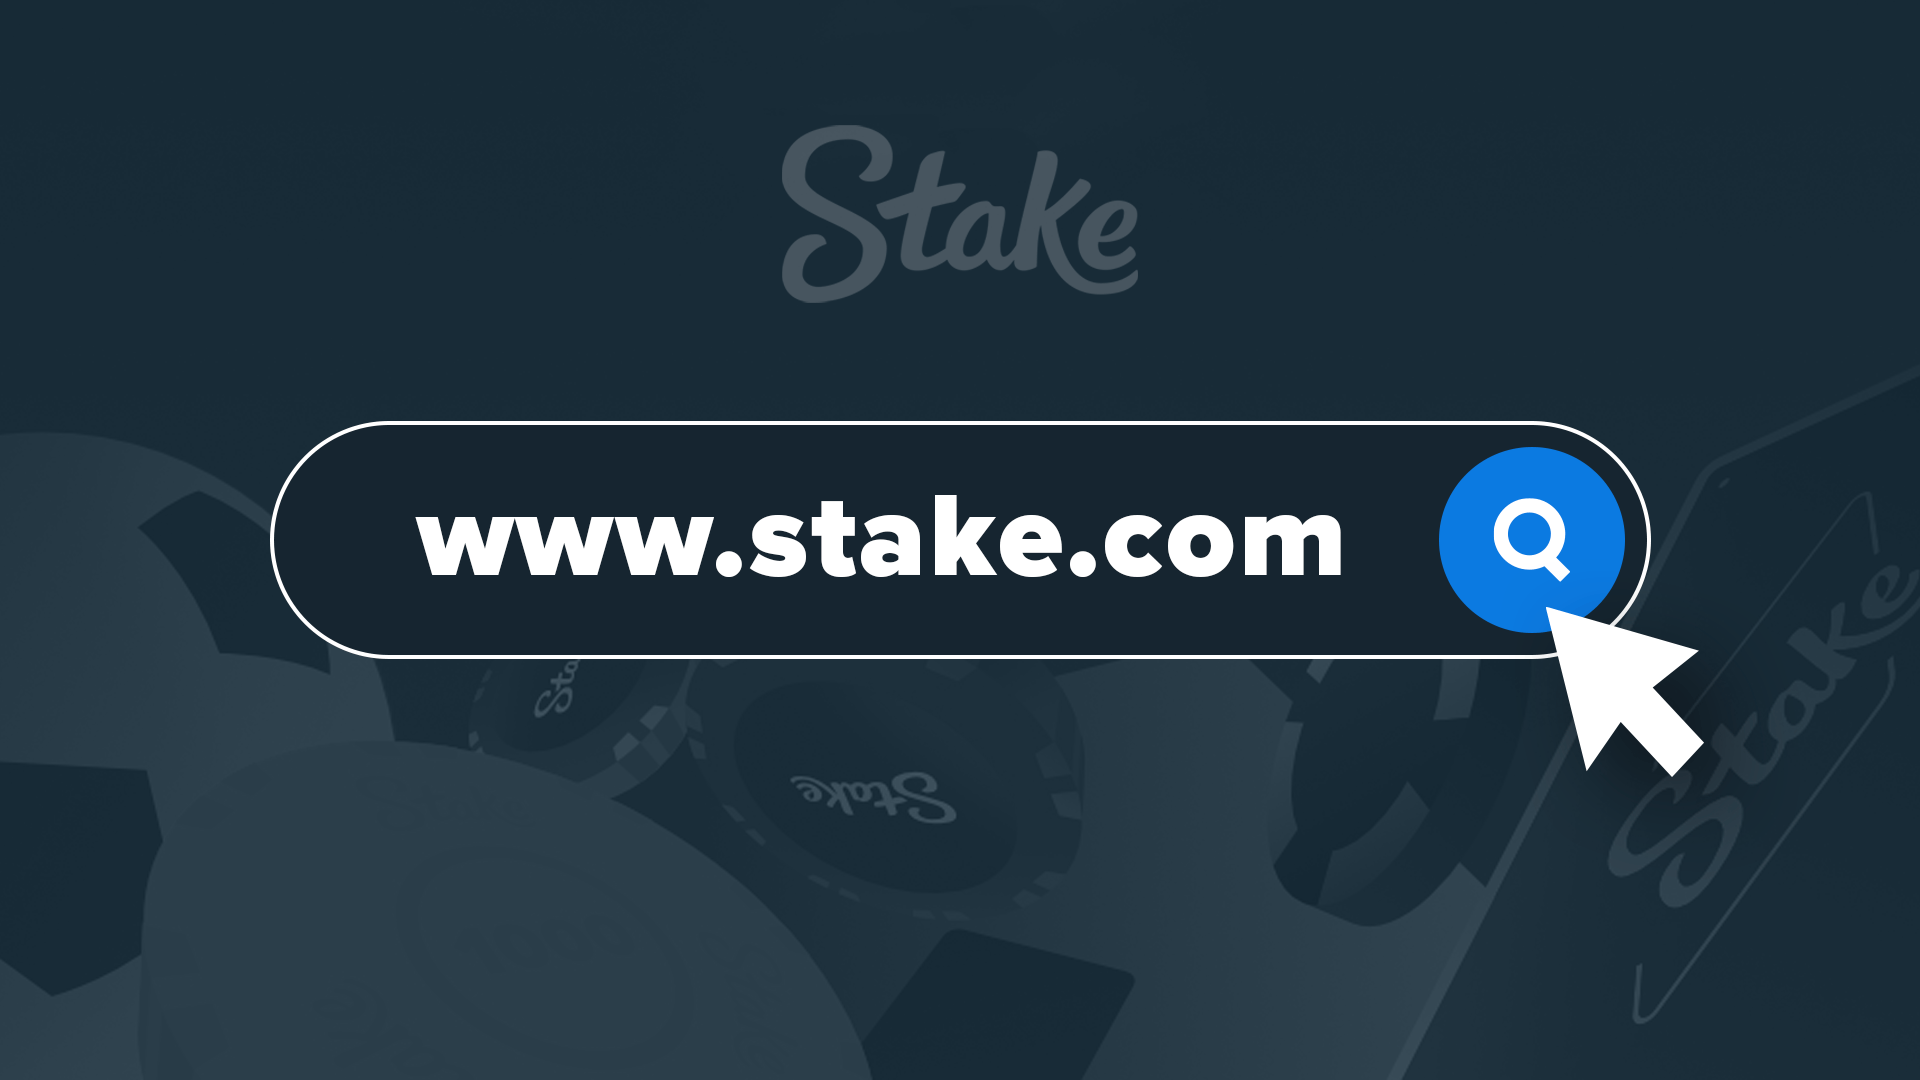 Stake Registration Guide: How to Register & Play at Stake.com